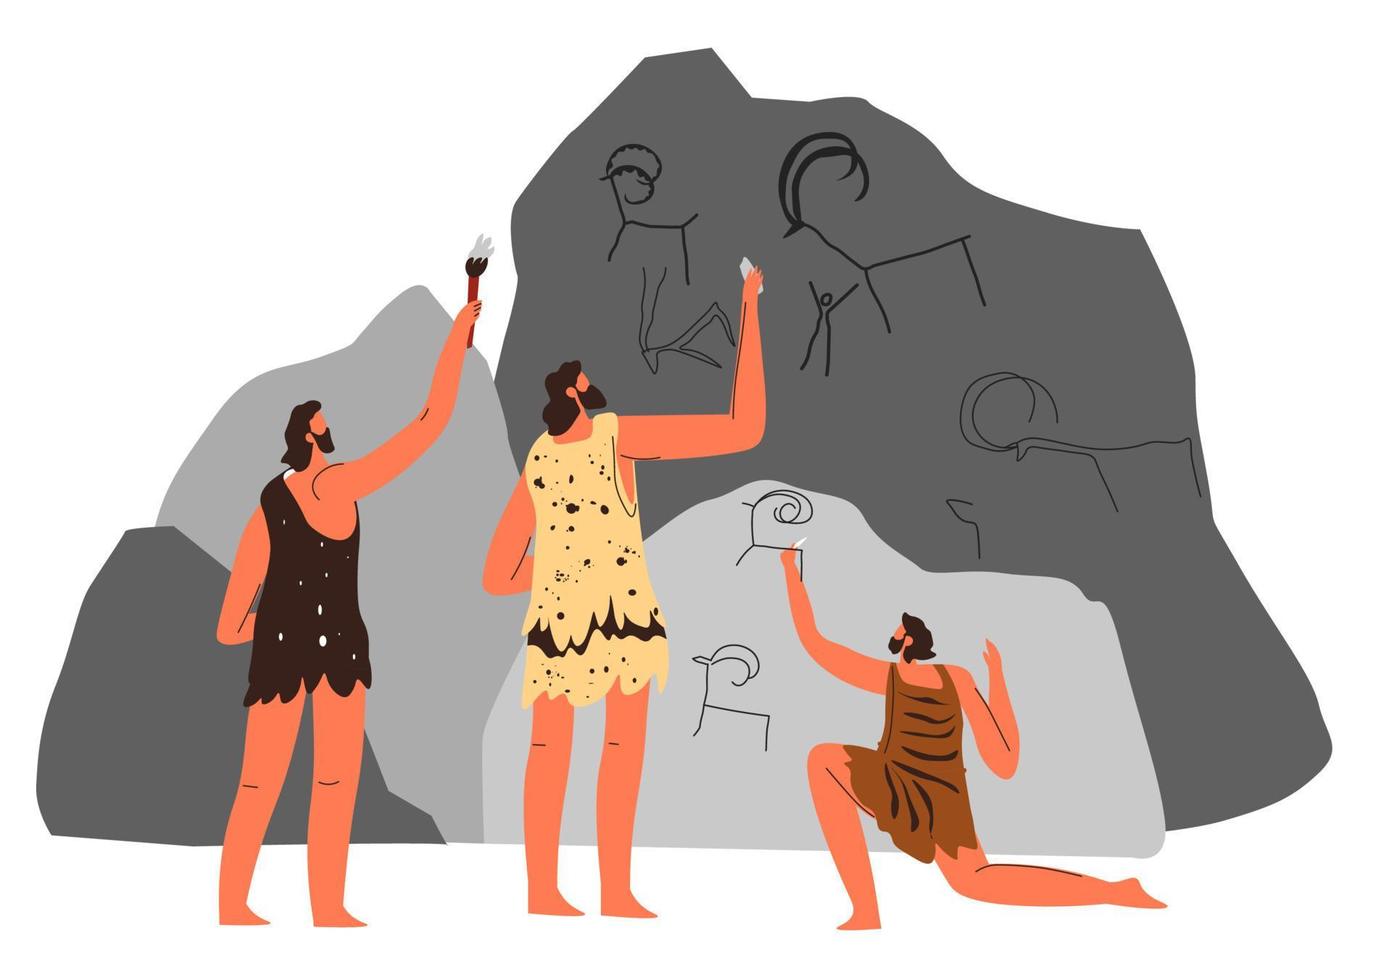 Prehistoric art, people drawing animals on caves vector